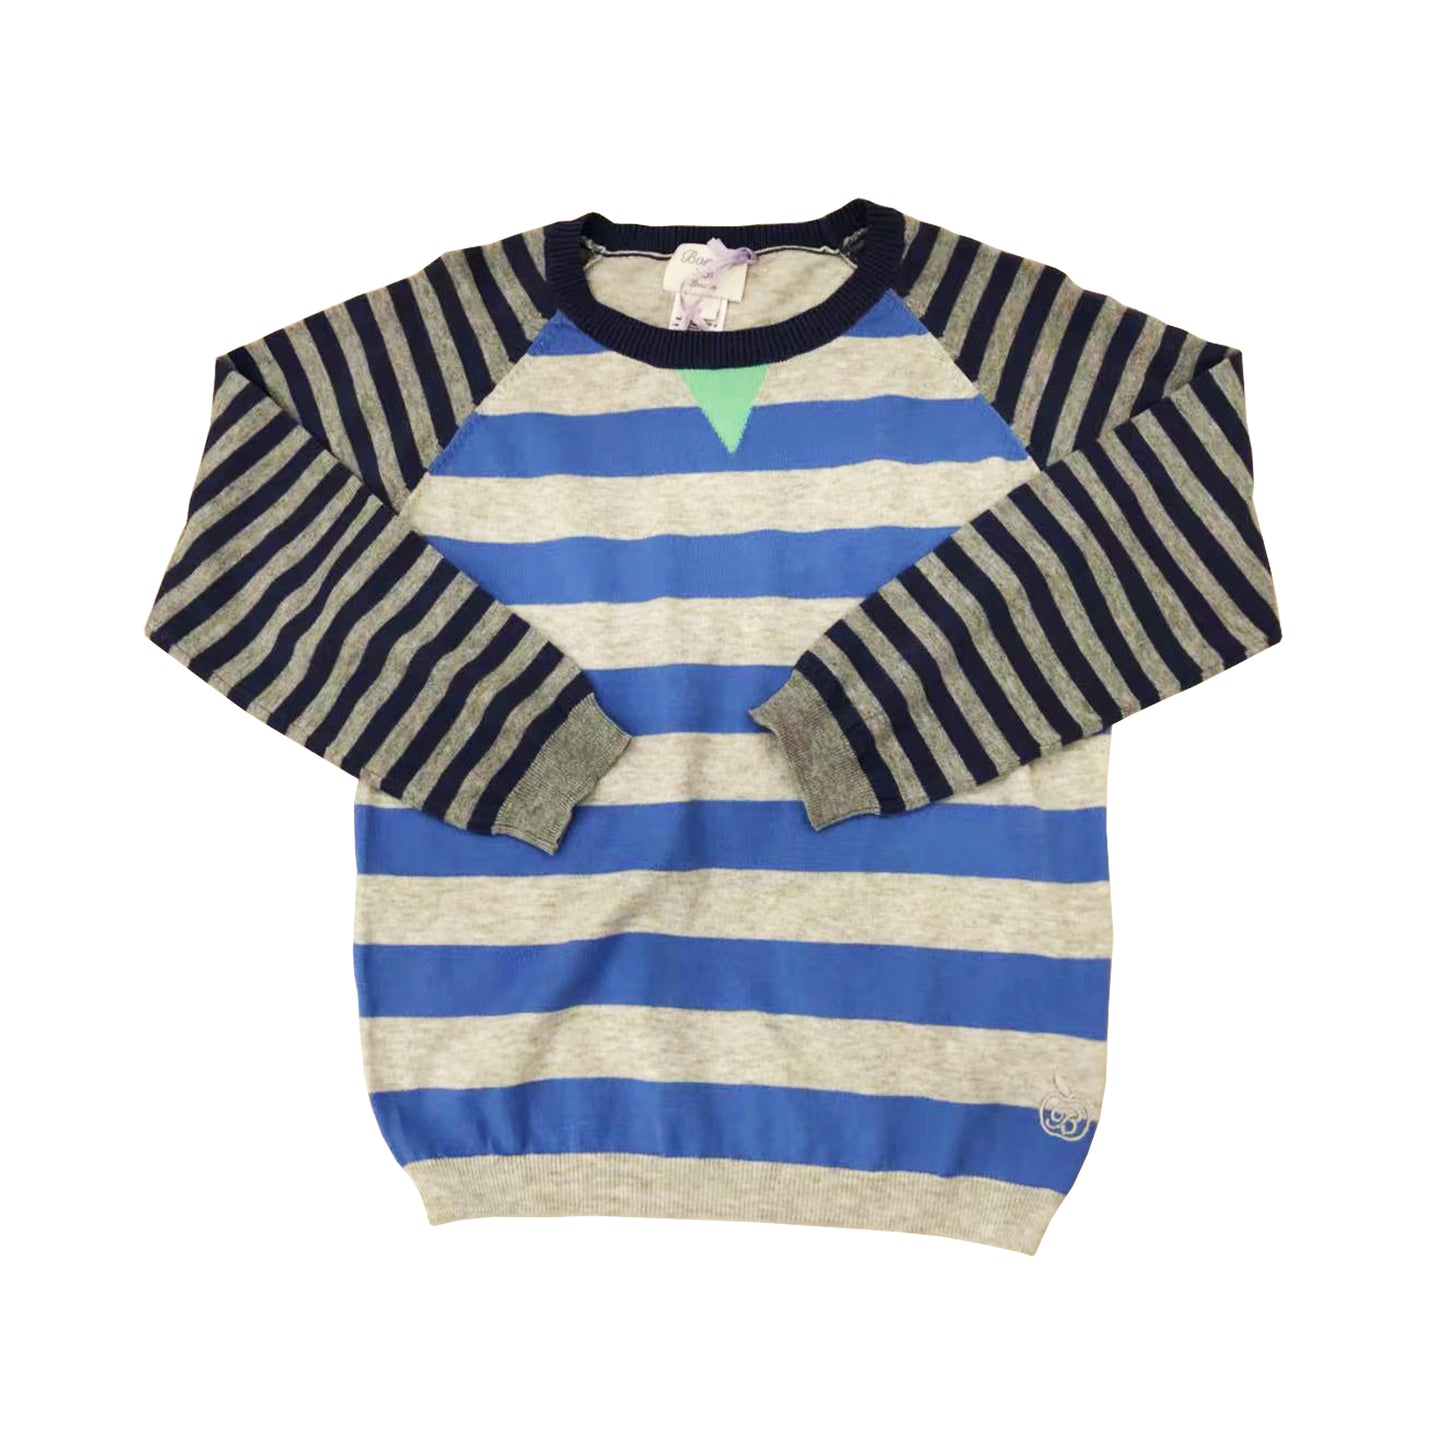 SWEATER - KIDS - 2 COLOR (GREY/BLUE) - ANDERS